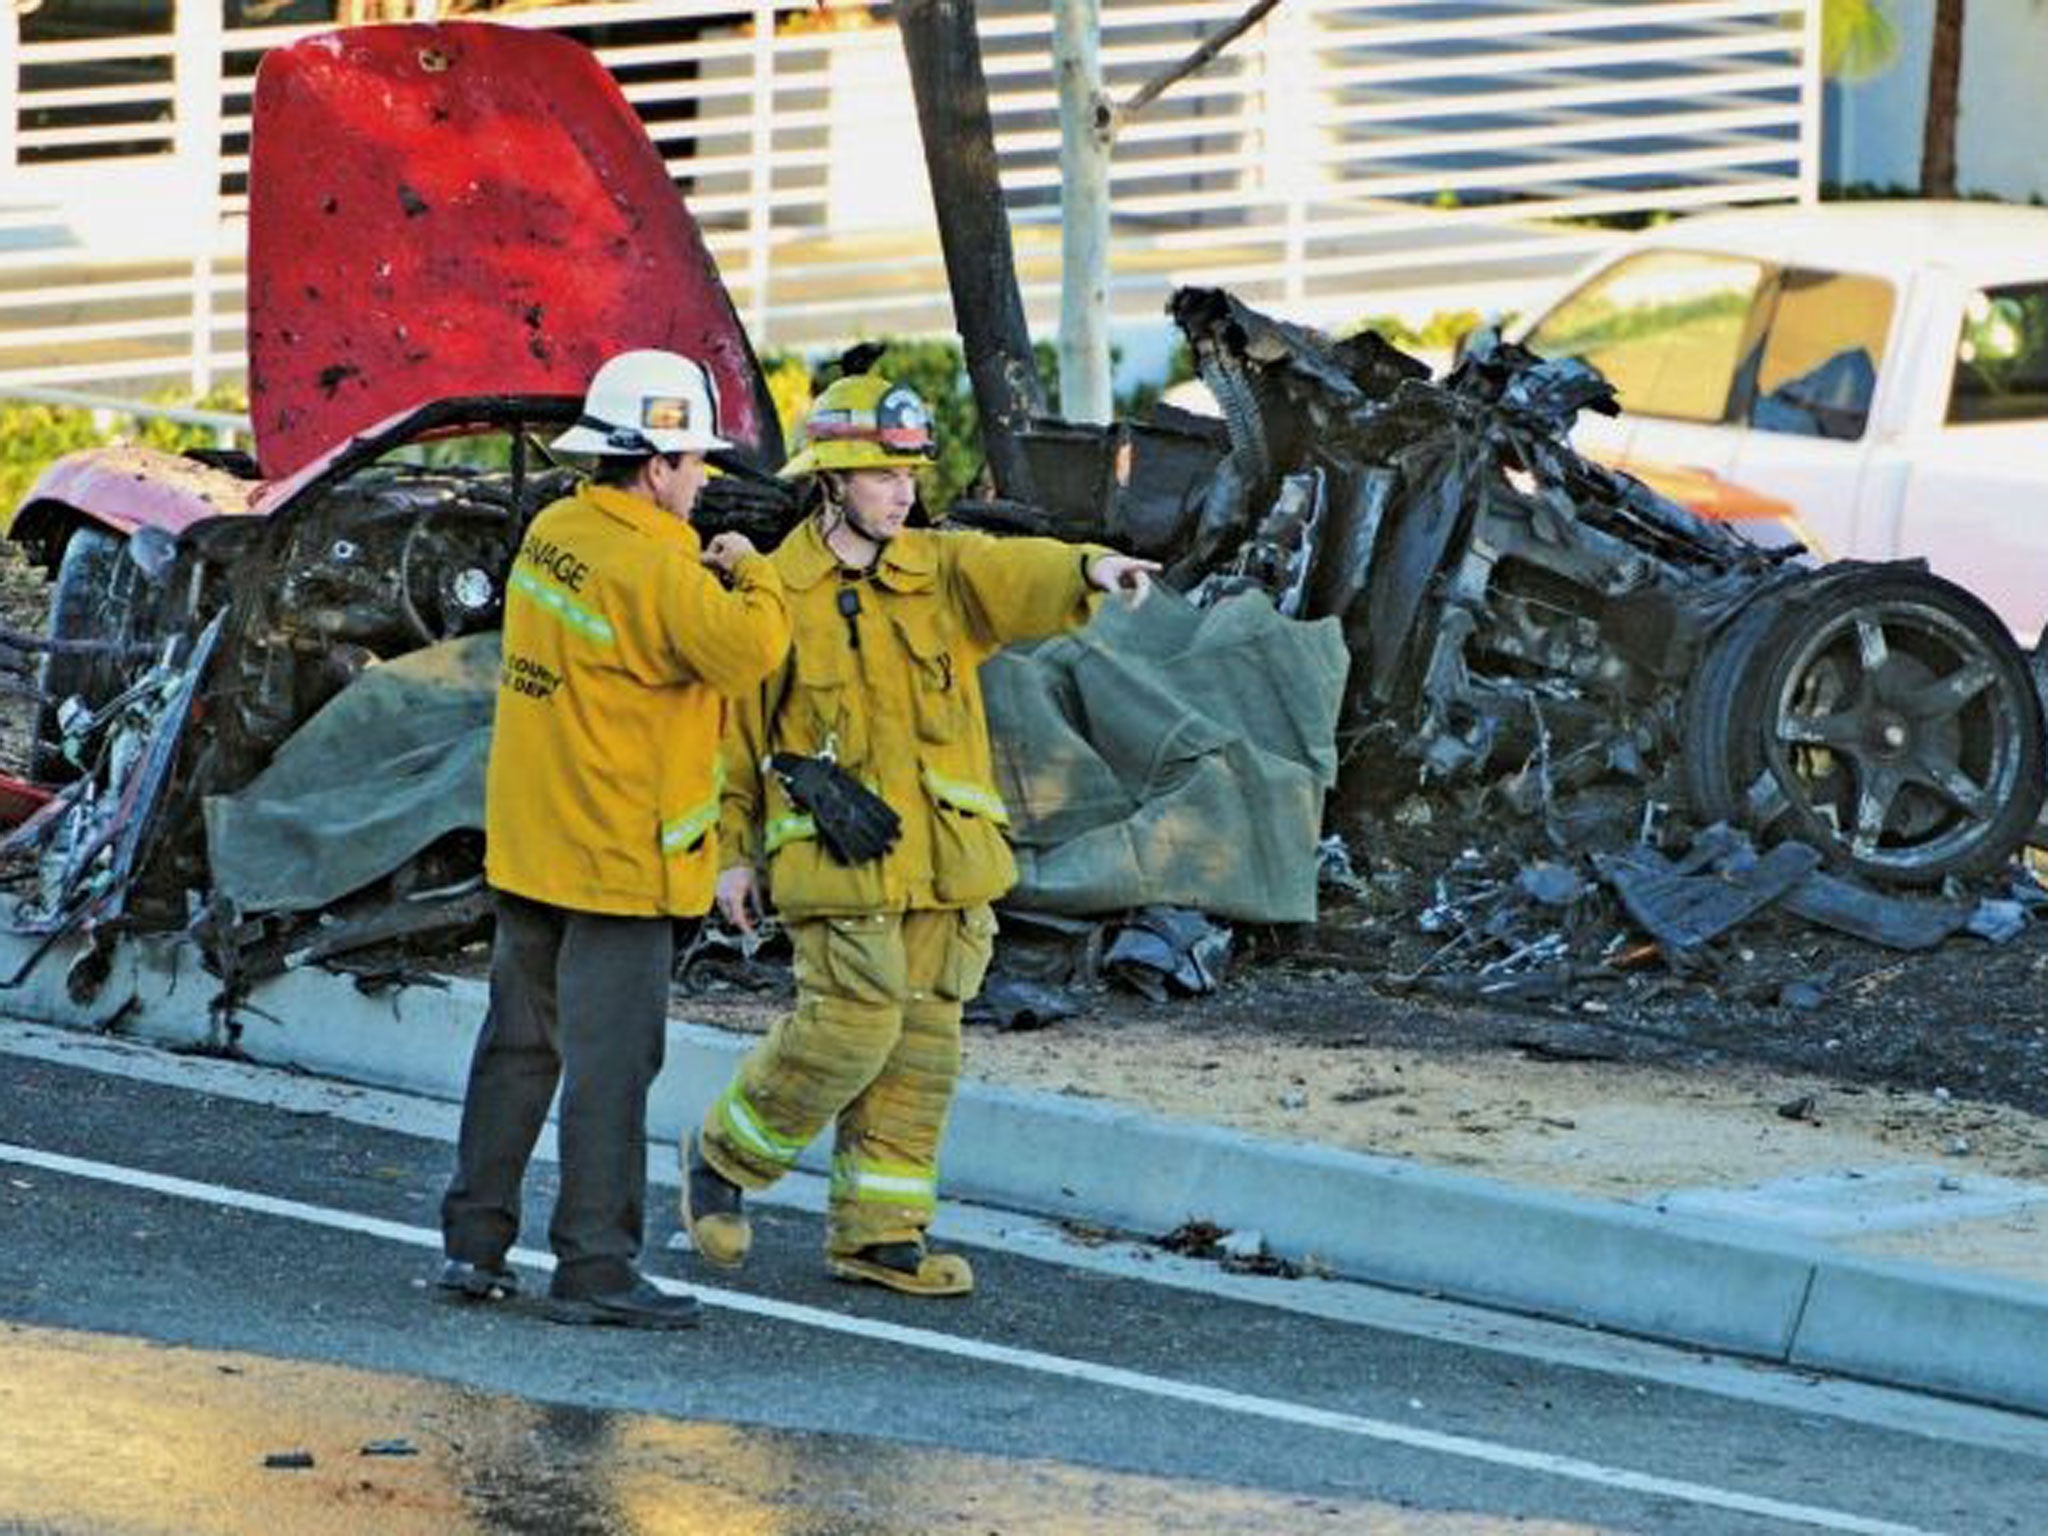 Sheriff's deputies work near the wreckage of a Porsche that crashed into a light pole on Hercules Street near Kelly Johnson Parkway in Valencia, California, north of Los Angeles